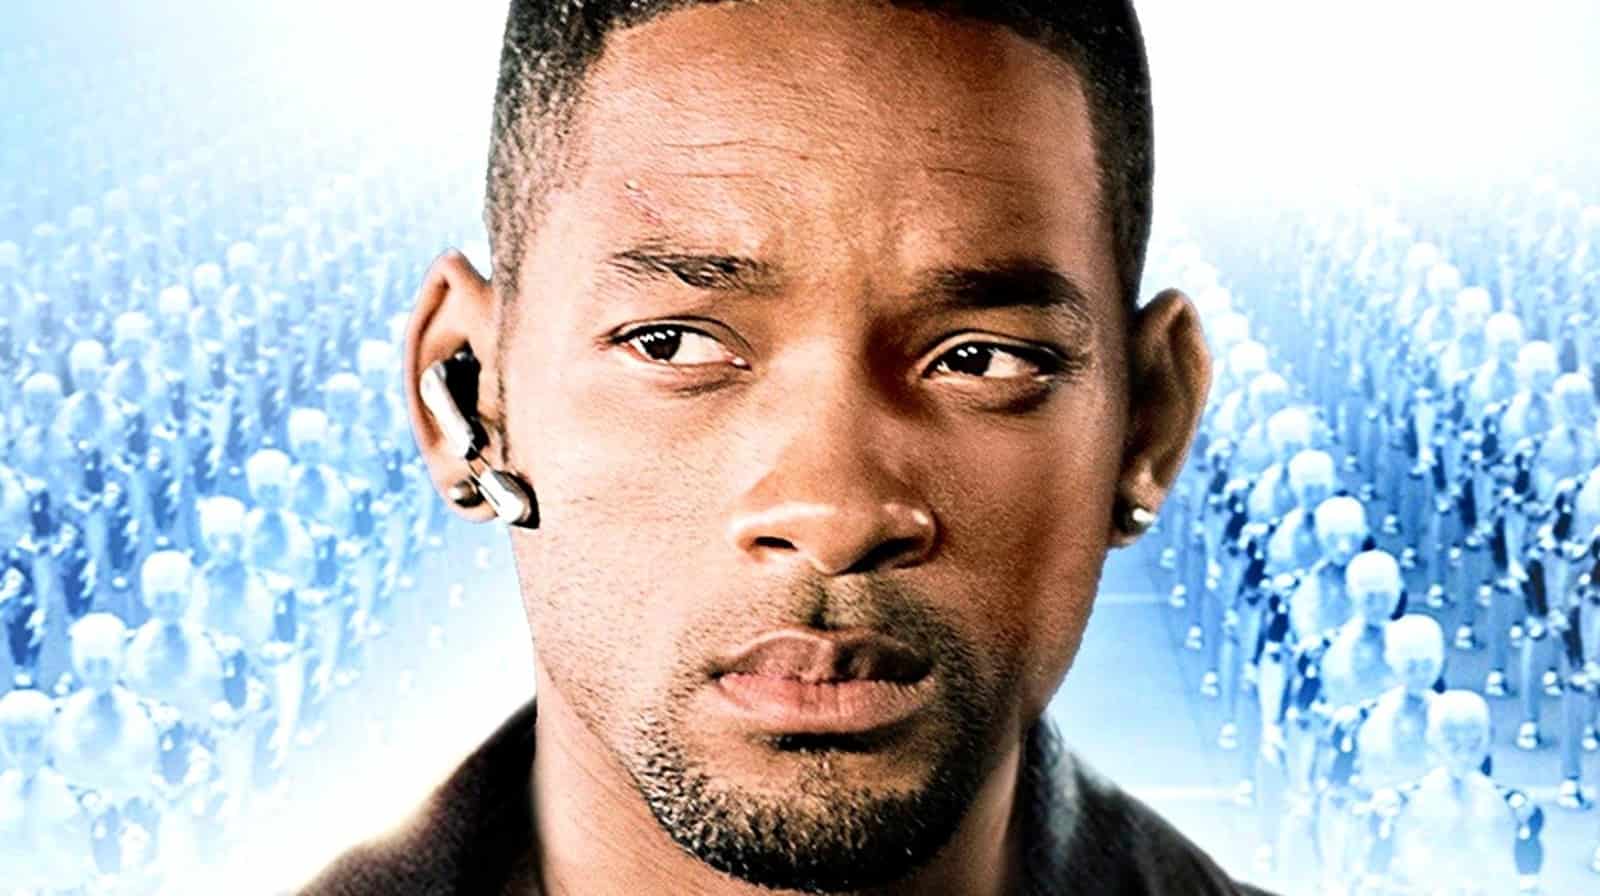 propel Melankoli hybrid I, Robot 2: The Sequel That Can Save Will Smith's Career